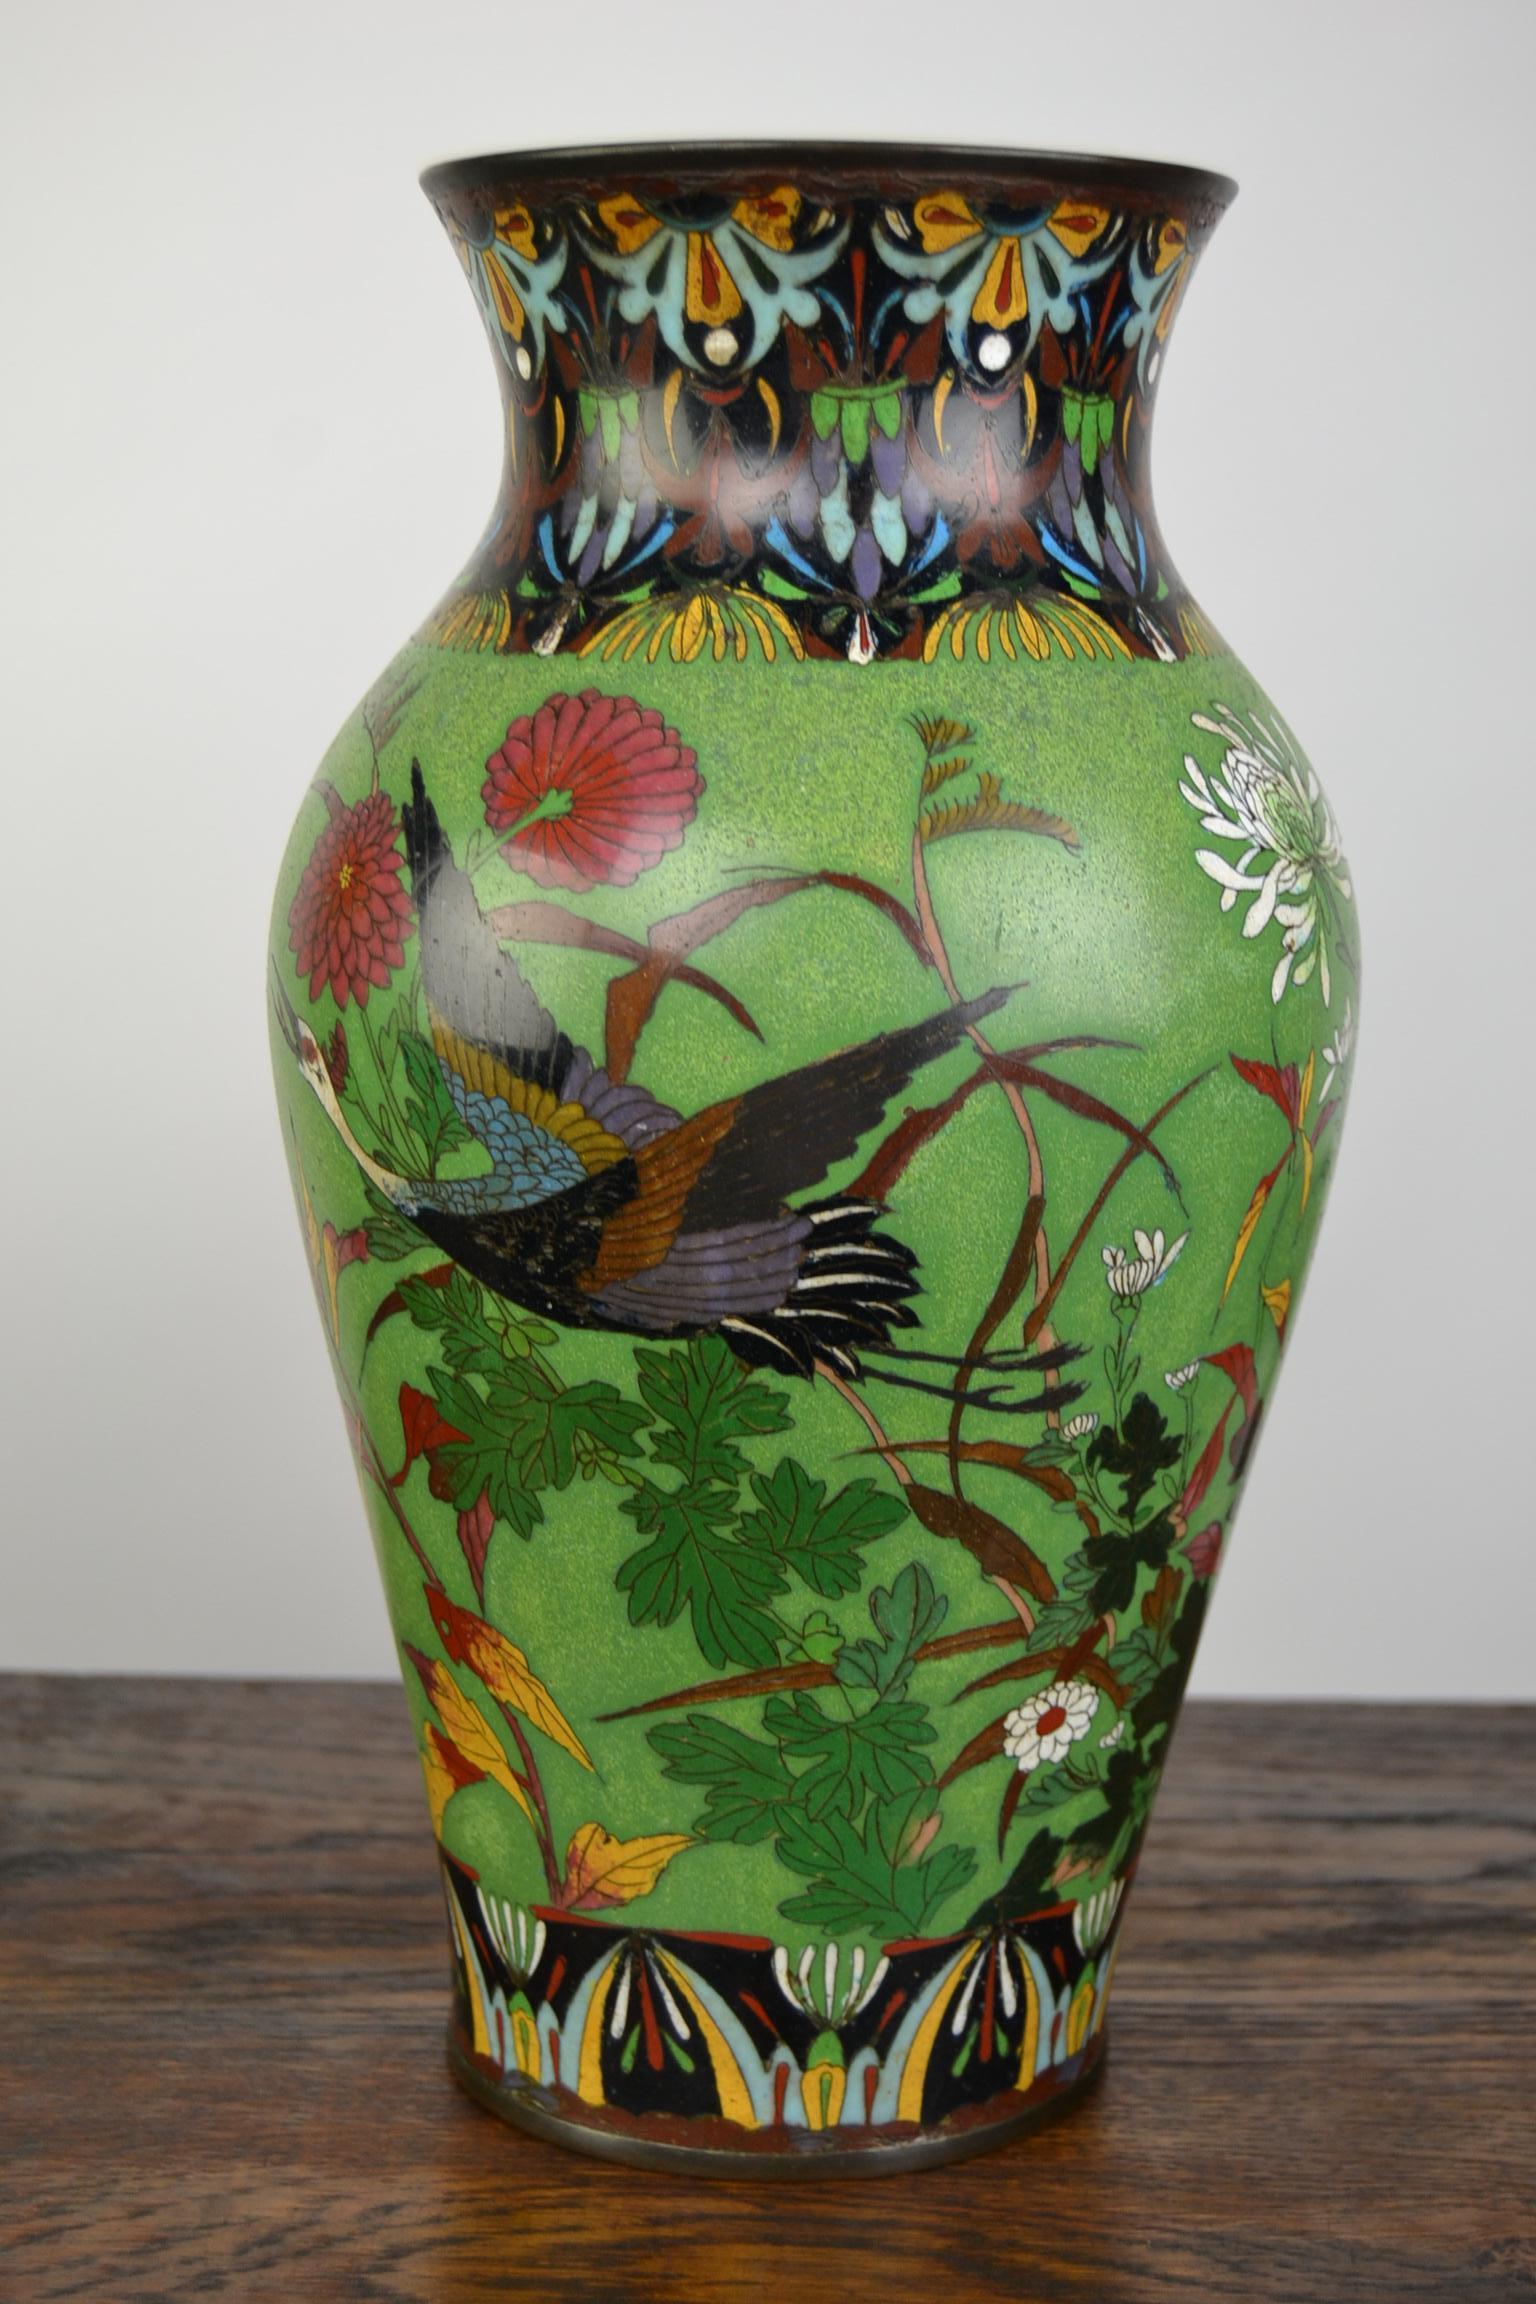 Pair of Japanese Cloisonne Enamel on Copper Vases with Crane Birds and Flowers  12